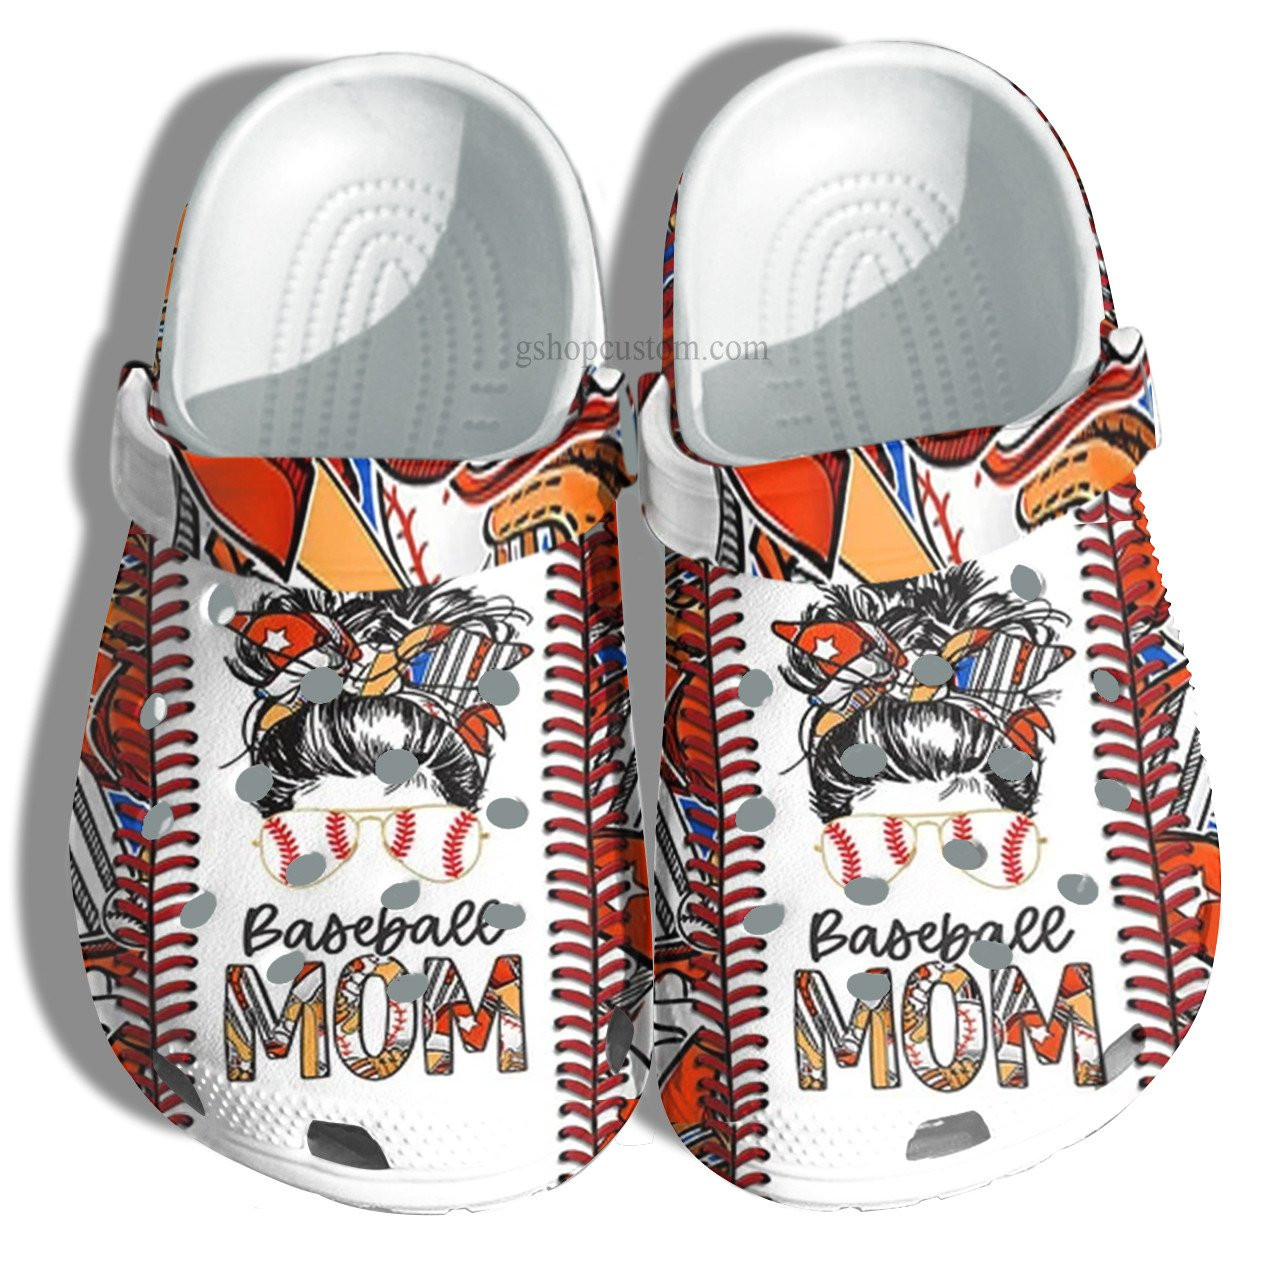 Cheer Up Baseball Mom Croc Shoes Gift Wife- Cool Women Baseball Line Crocs Shoes Gift Mother Day